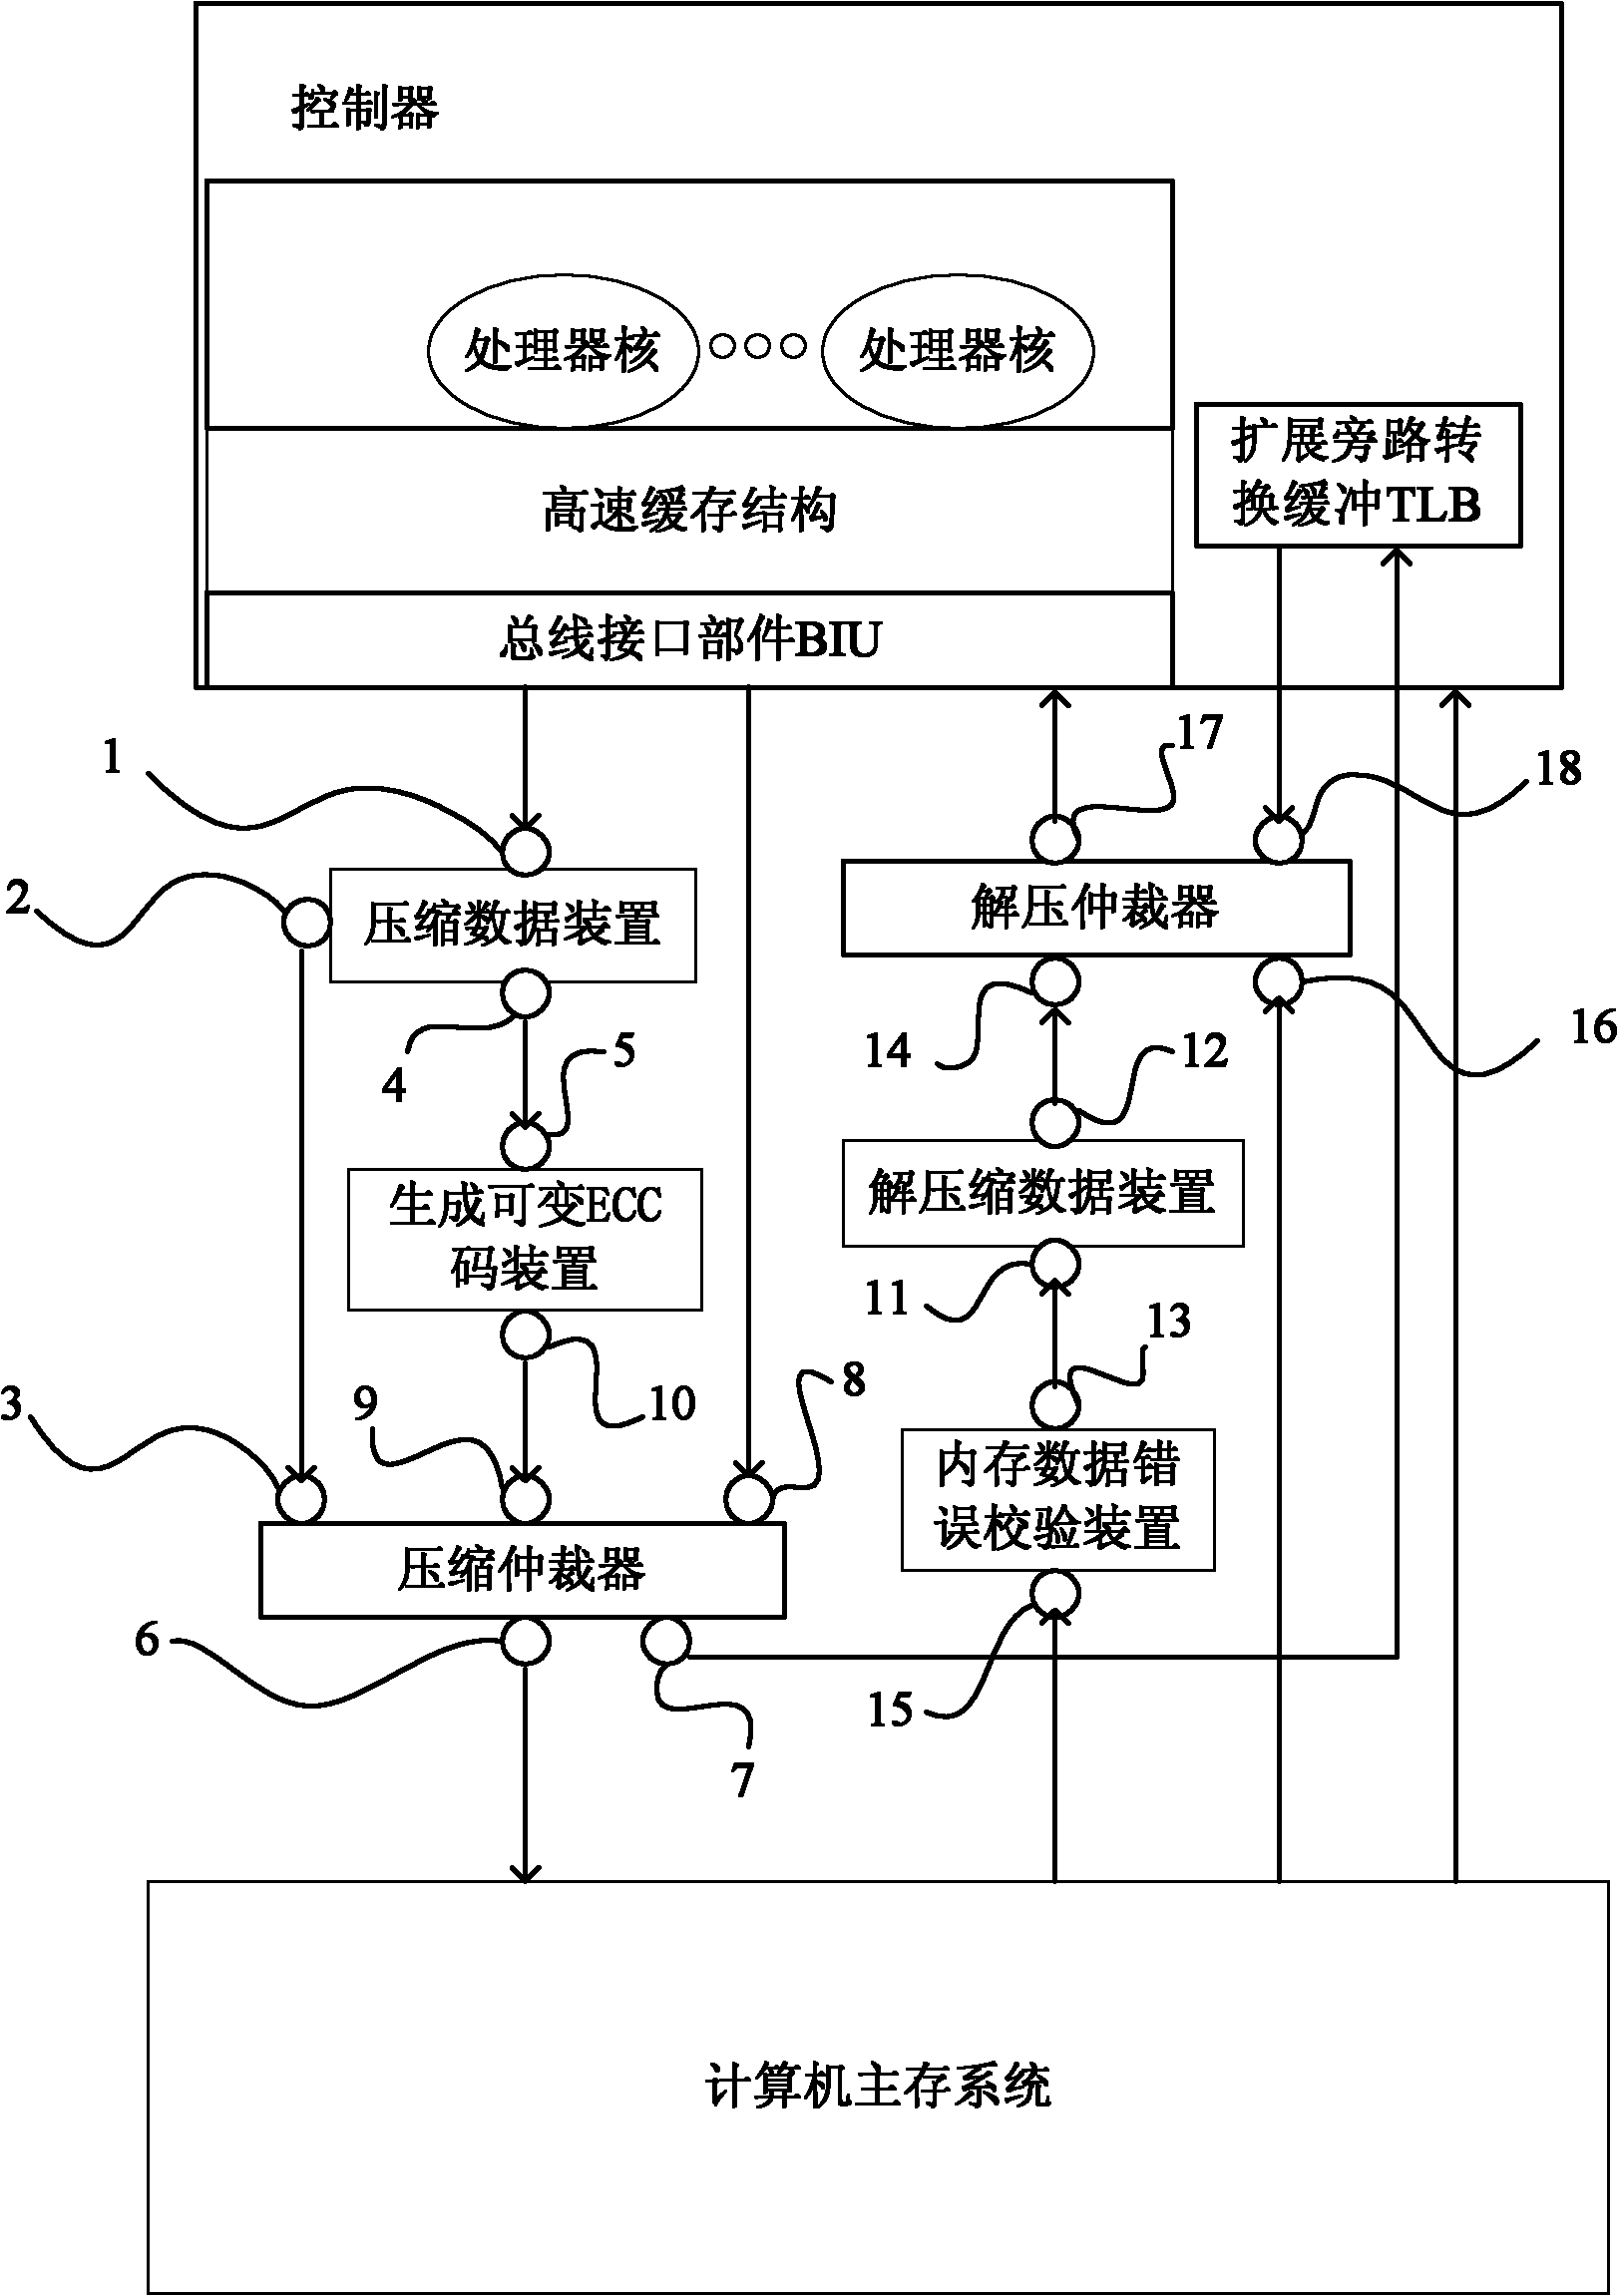 Data compression device for improving main memory reliability of computer, and method thereof